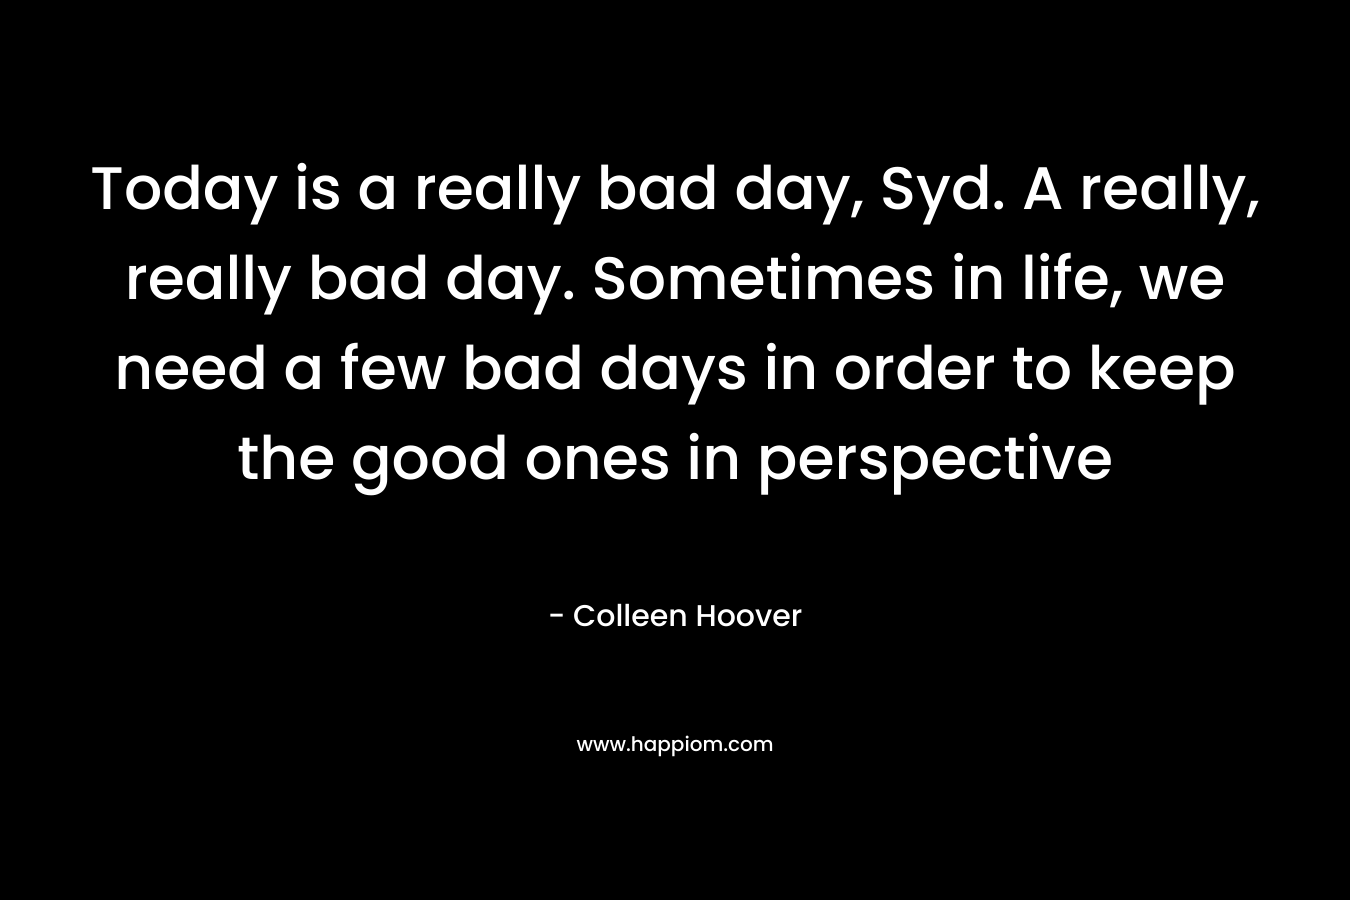 Today is a really bad day, Syd. A really, really bad day. Sometimes in life, we need a few bad days in order to keep the good ones in perspective